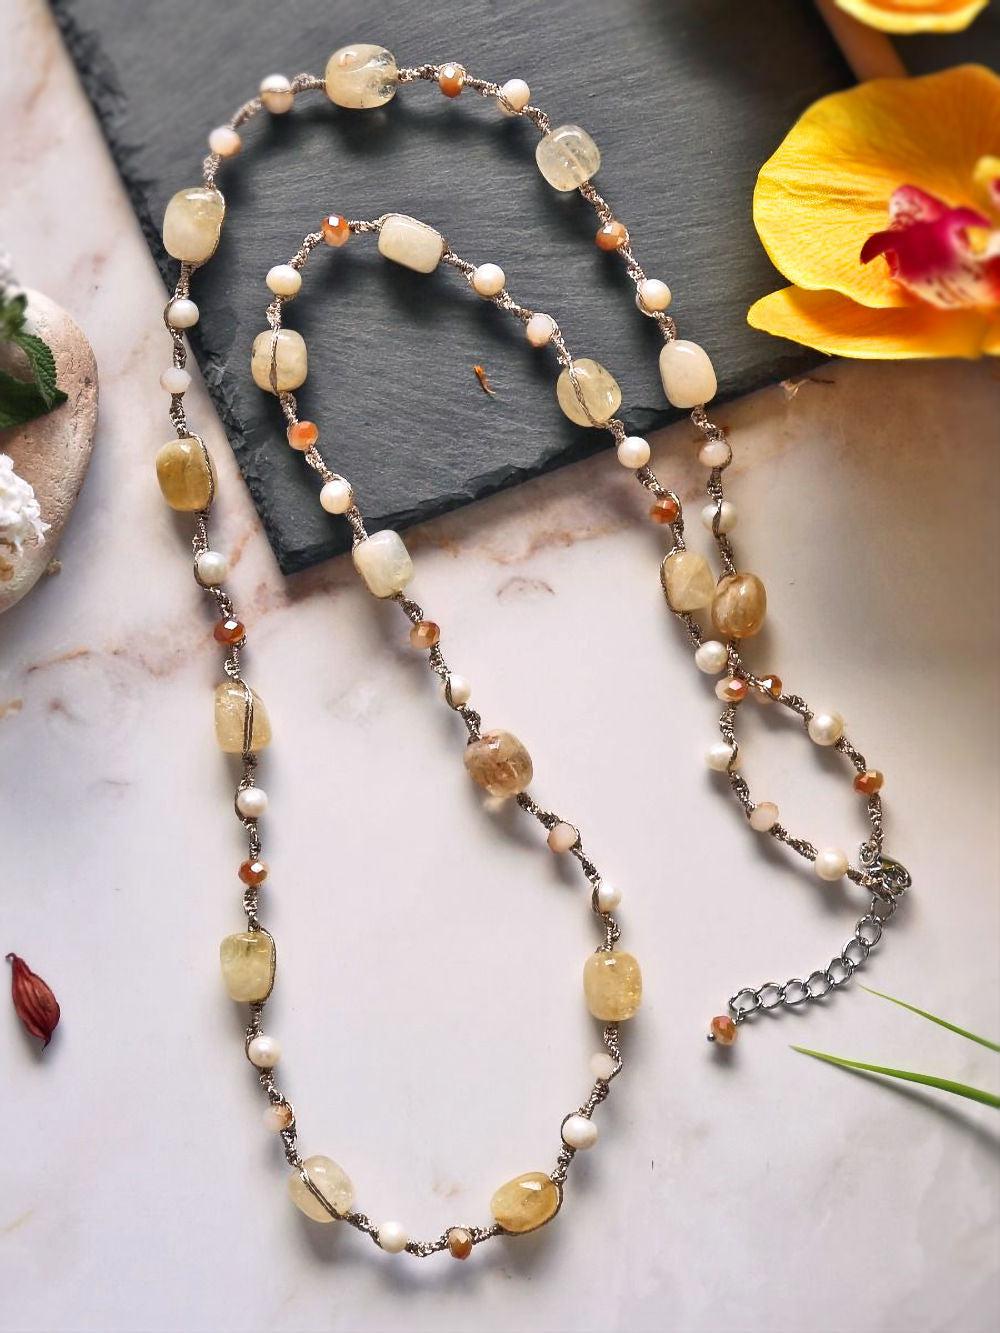 Citrine Necklace with Pearl accents on Macrame